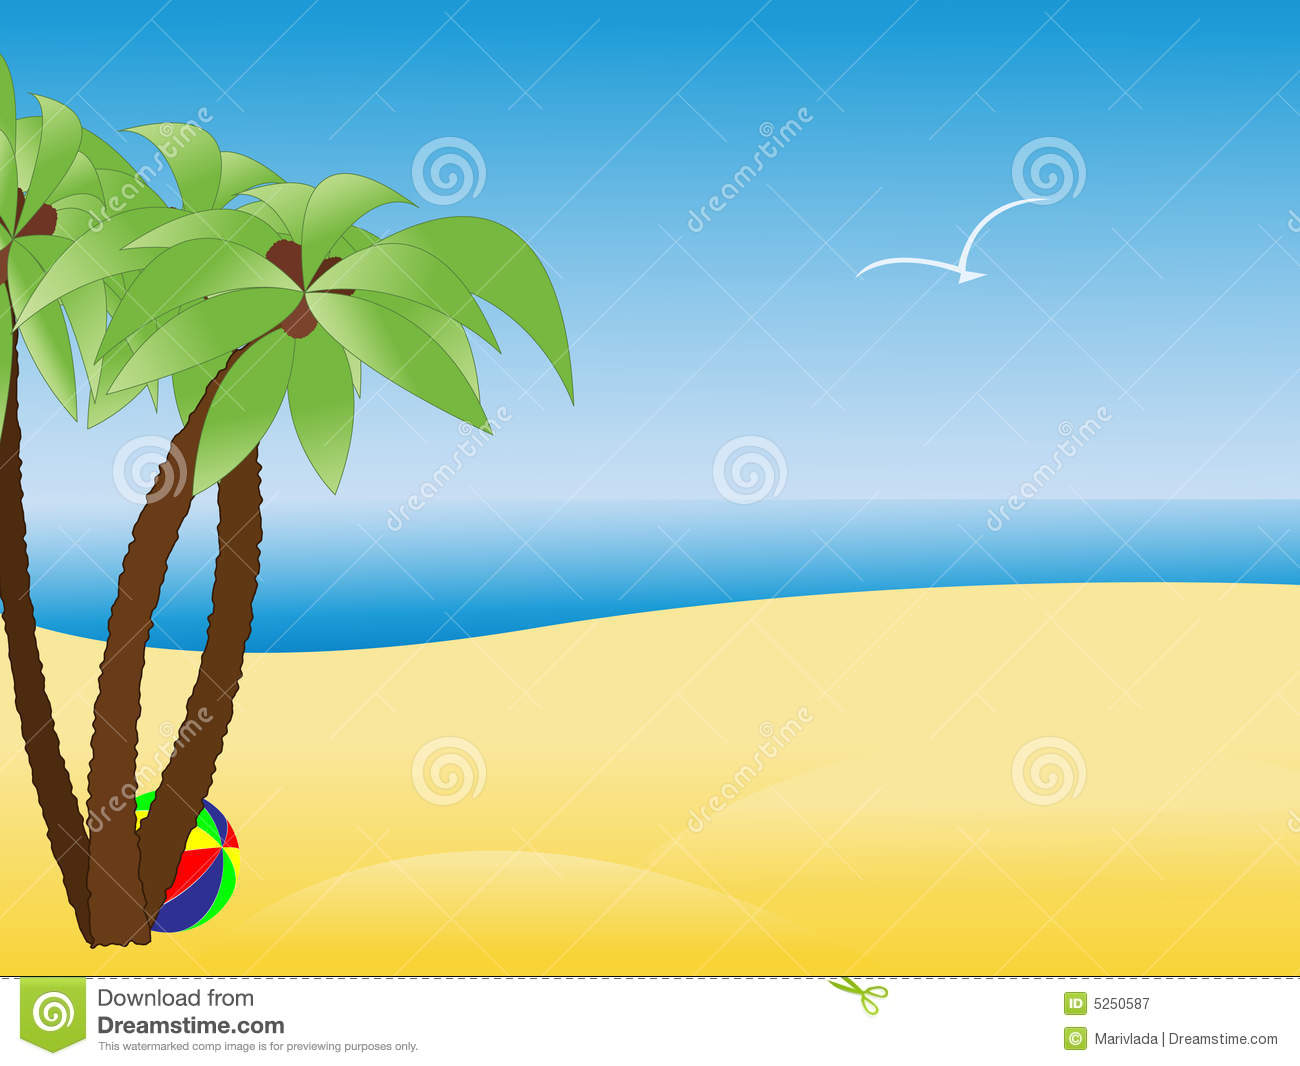 Scene with empty tropical beach, palm trees Royalty Free Stock Photography